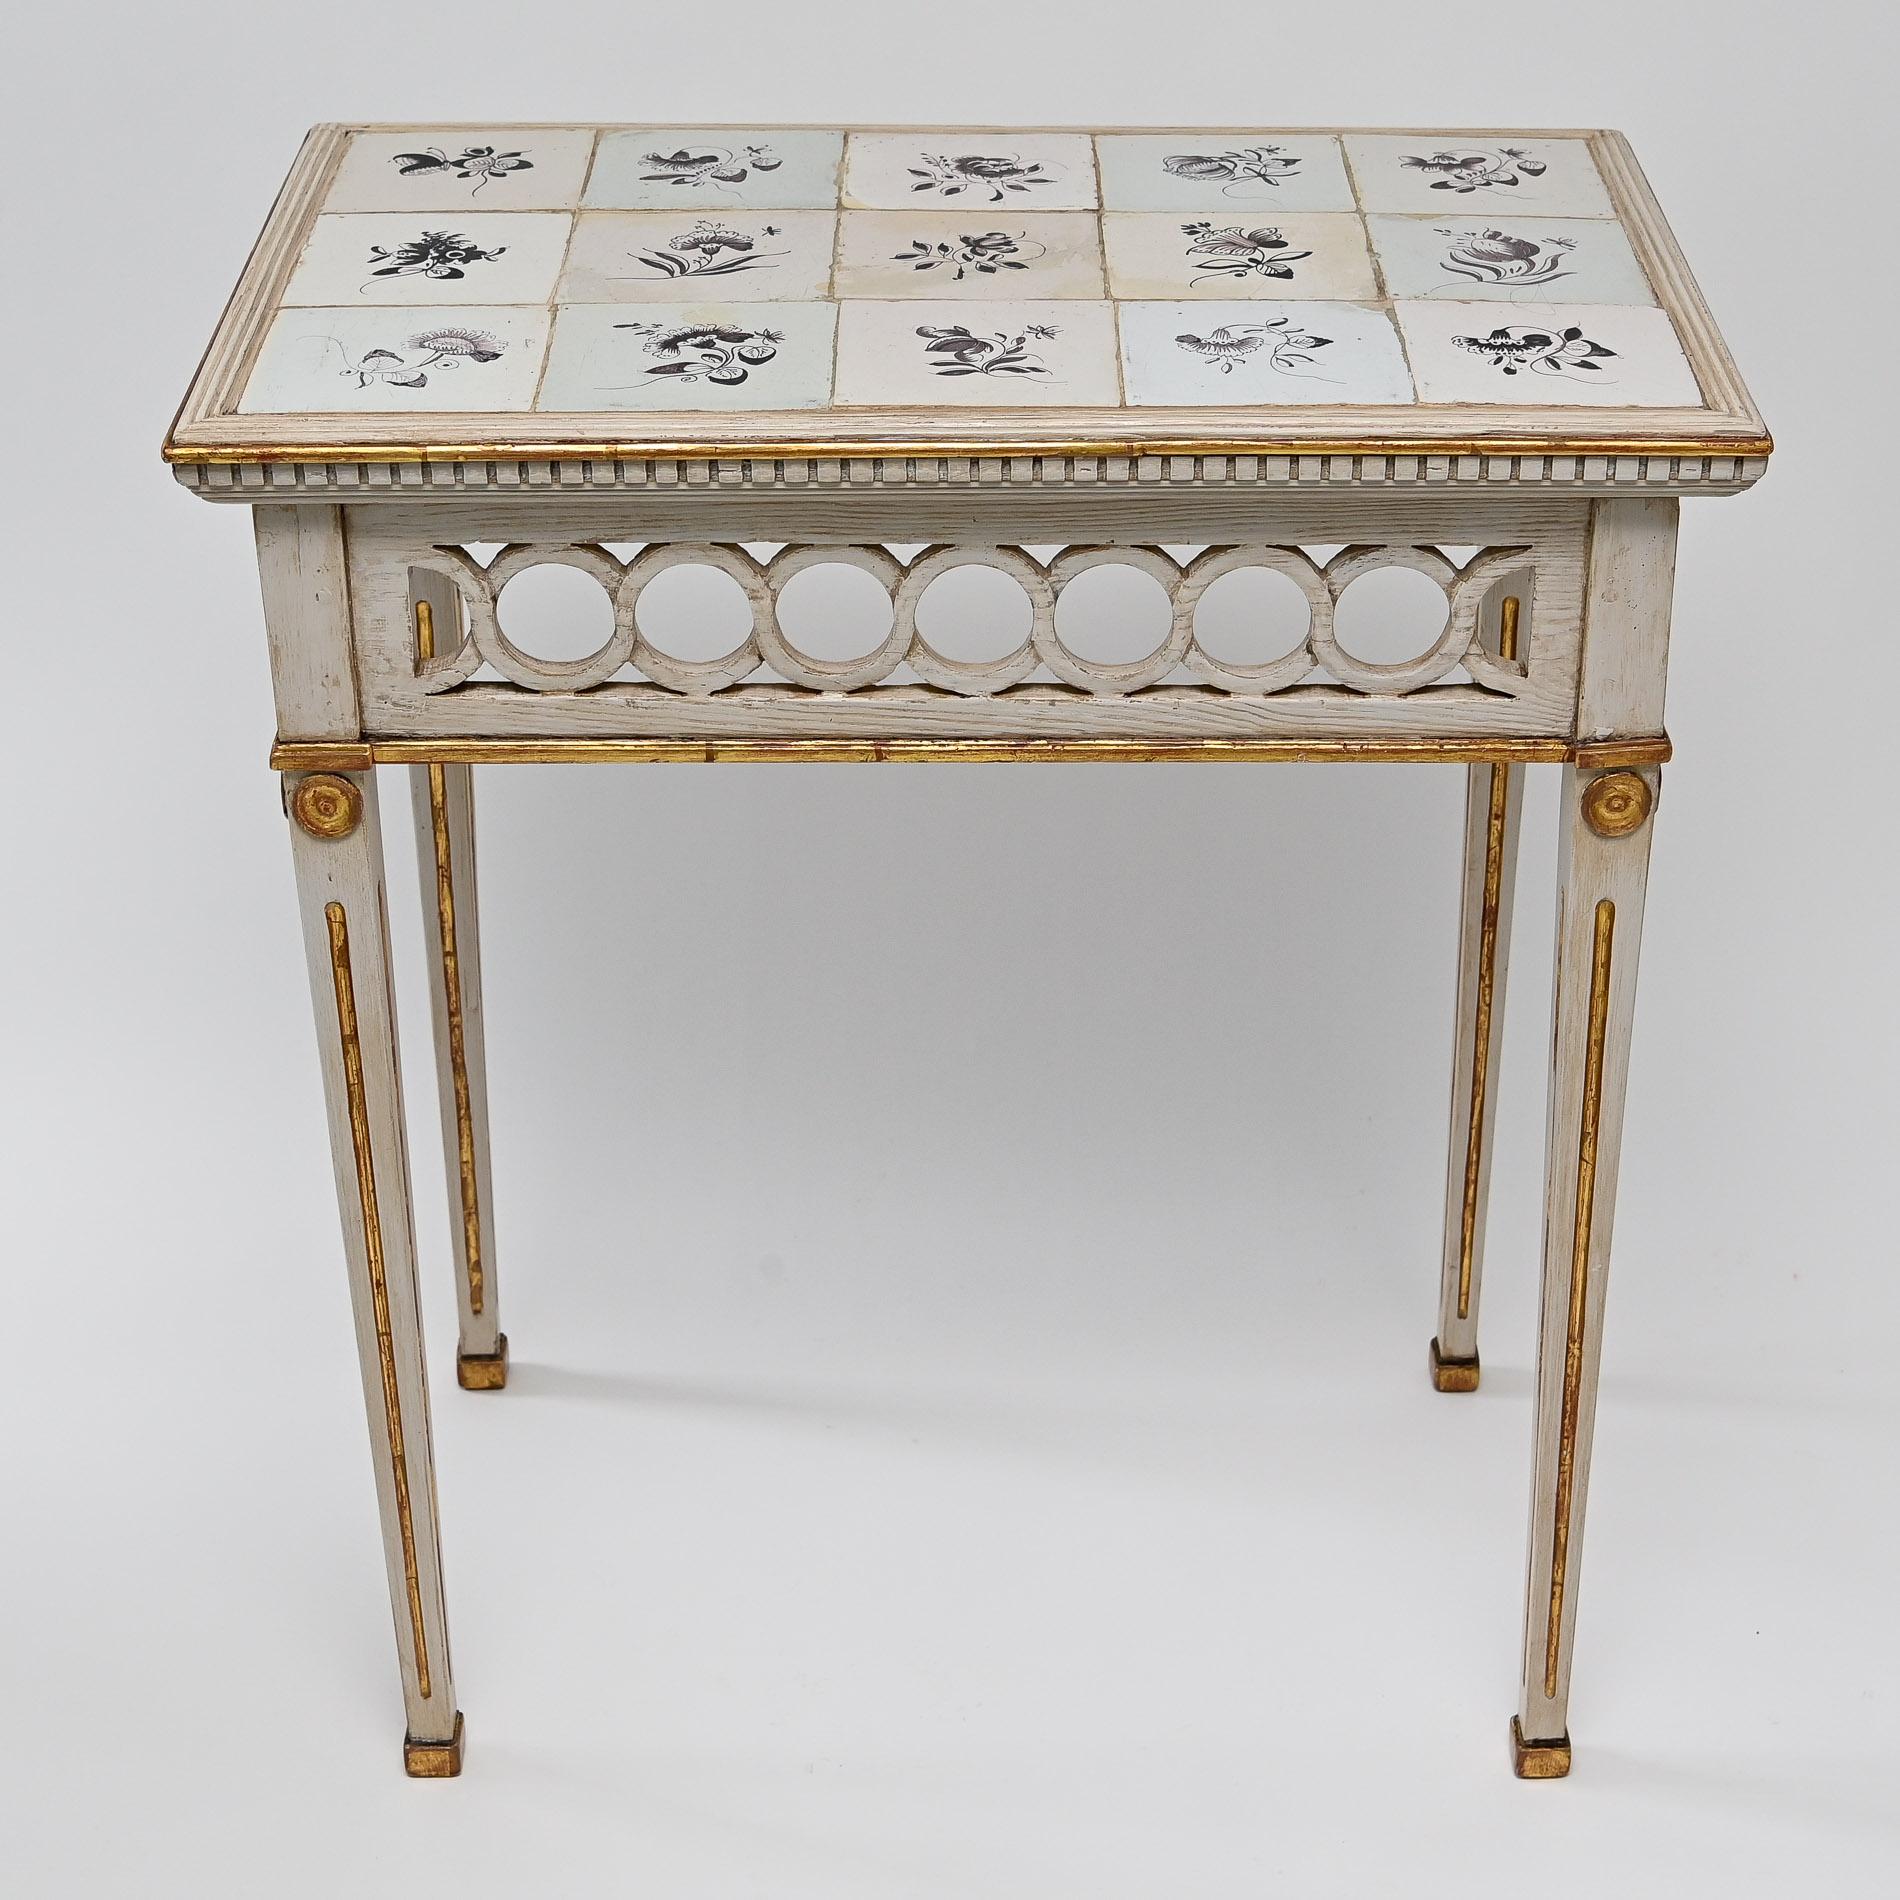 An unusual and rare pair of mounted console tables.
Beautiful special setting with the original gilding. The ceramic tiles with expressive depictions of flowers are also original and from the 18th century. The flower painting is done in manganese